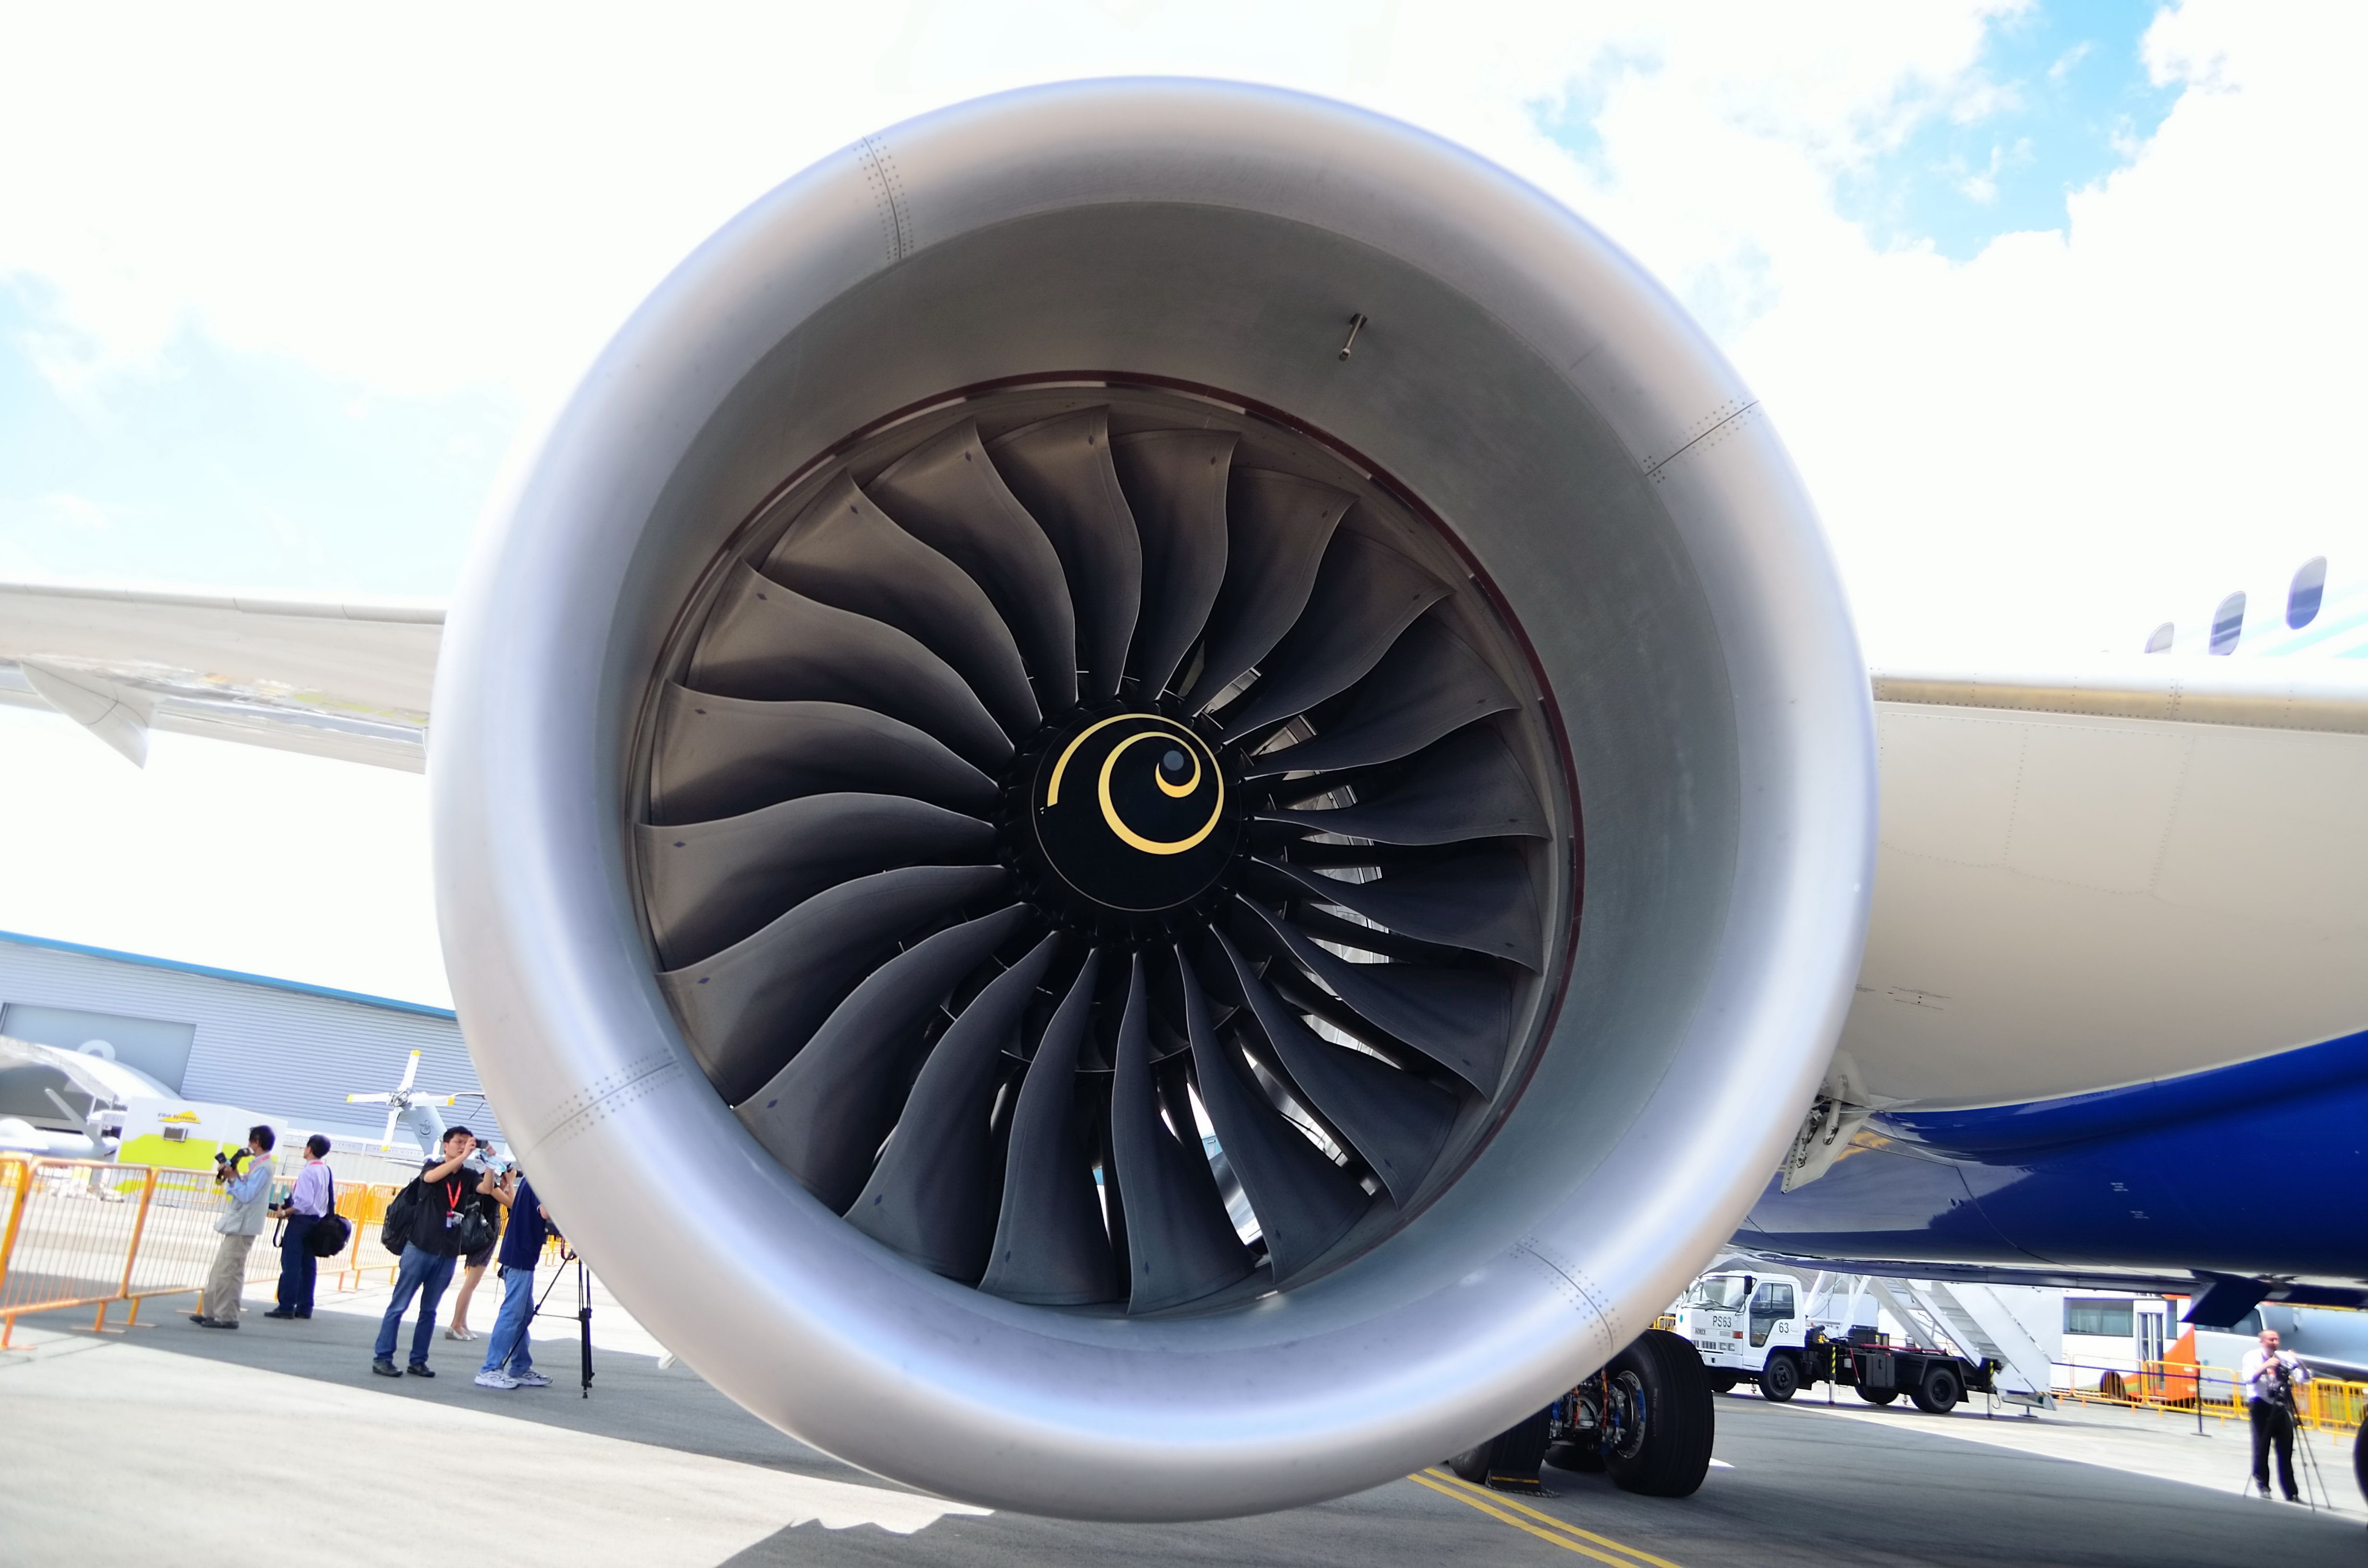 A Front view of the intake fan of the Boeing 787 Dreamliner's Rolls Royce Trent 1000 engine.